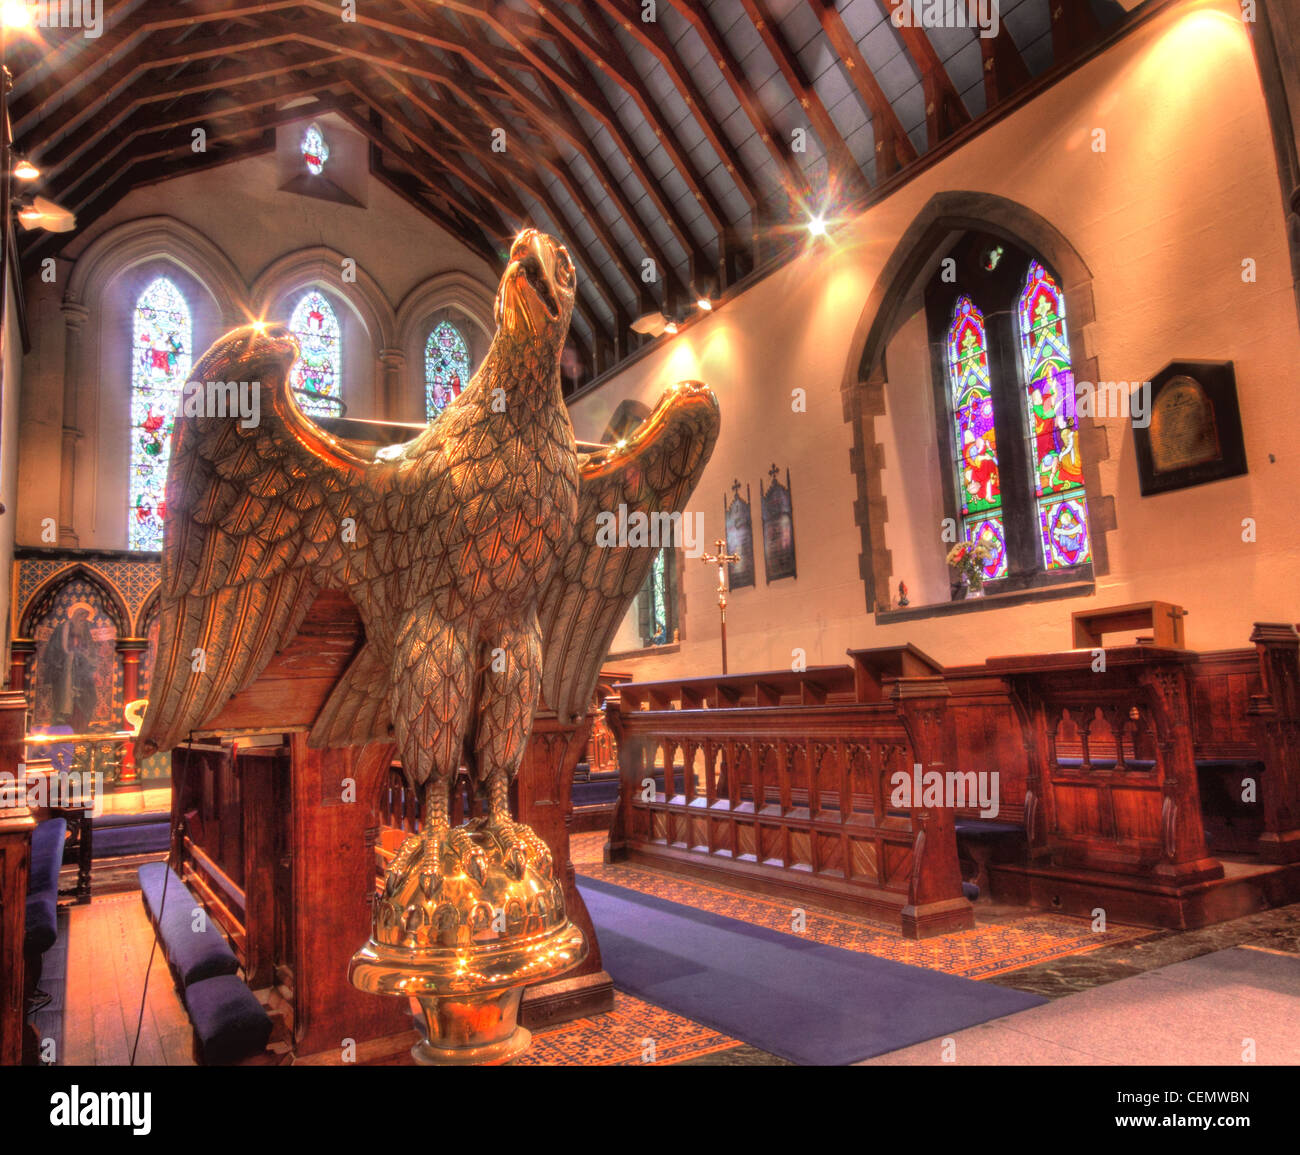 All Saints Church Thelwall, Warrington, Cheshire England UK United Kingdom. La religion anglicane Brass eagle vitraux lutrin Banque D'Images